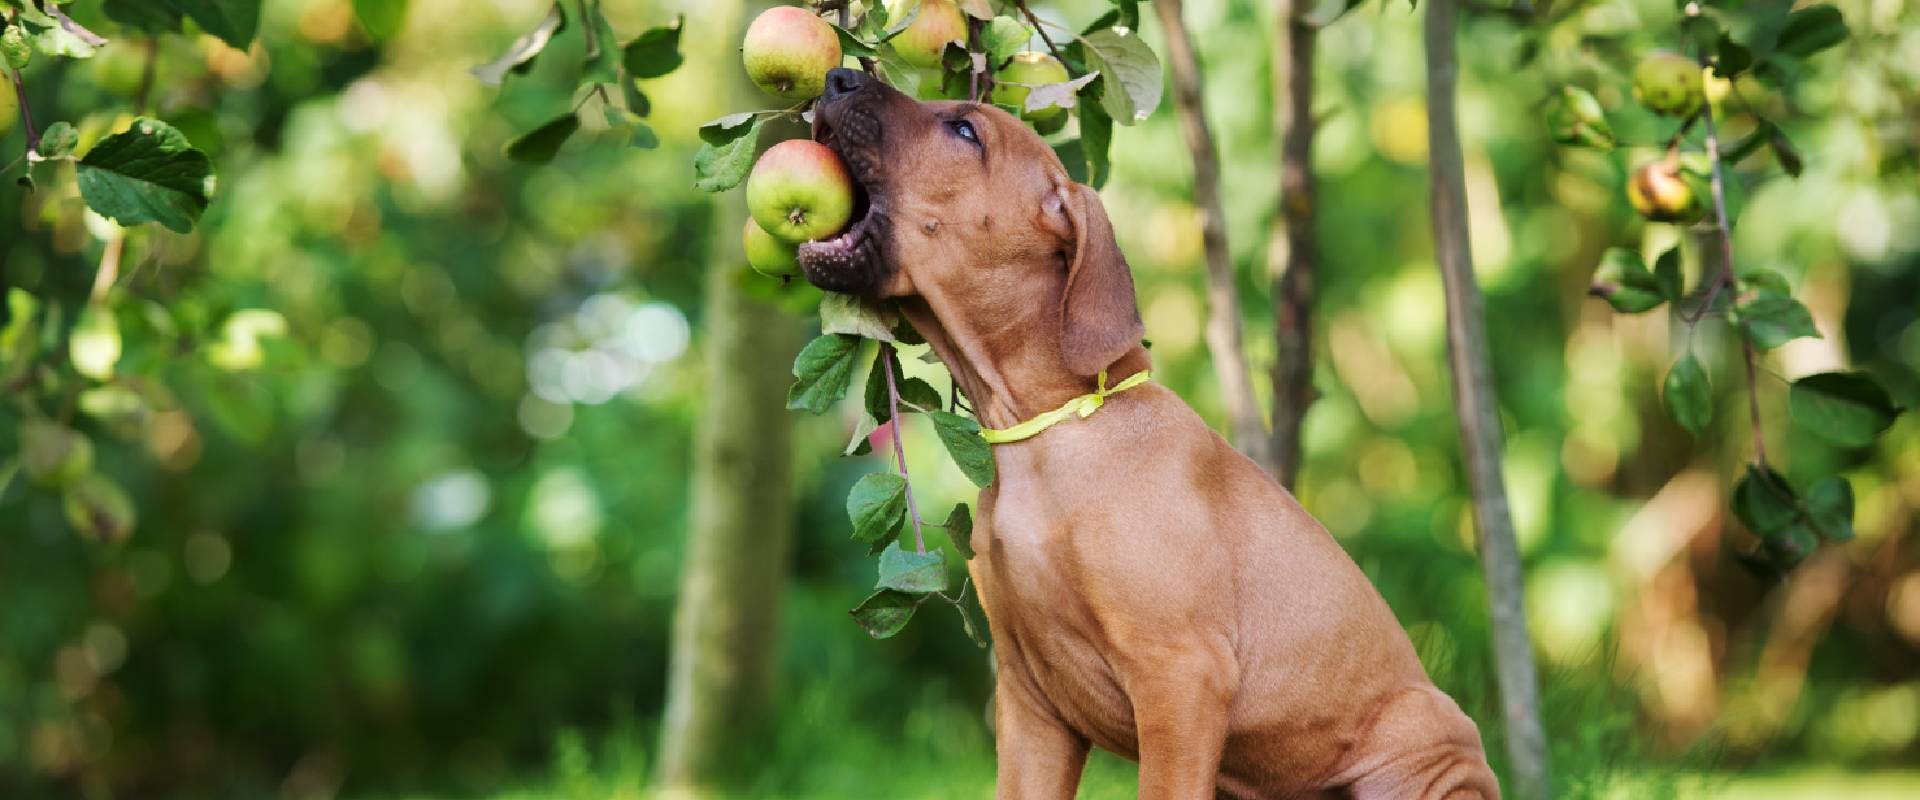 Puppy eating an apple from a tree